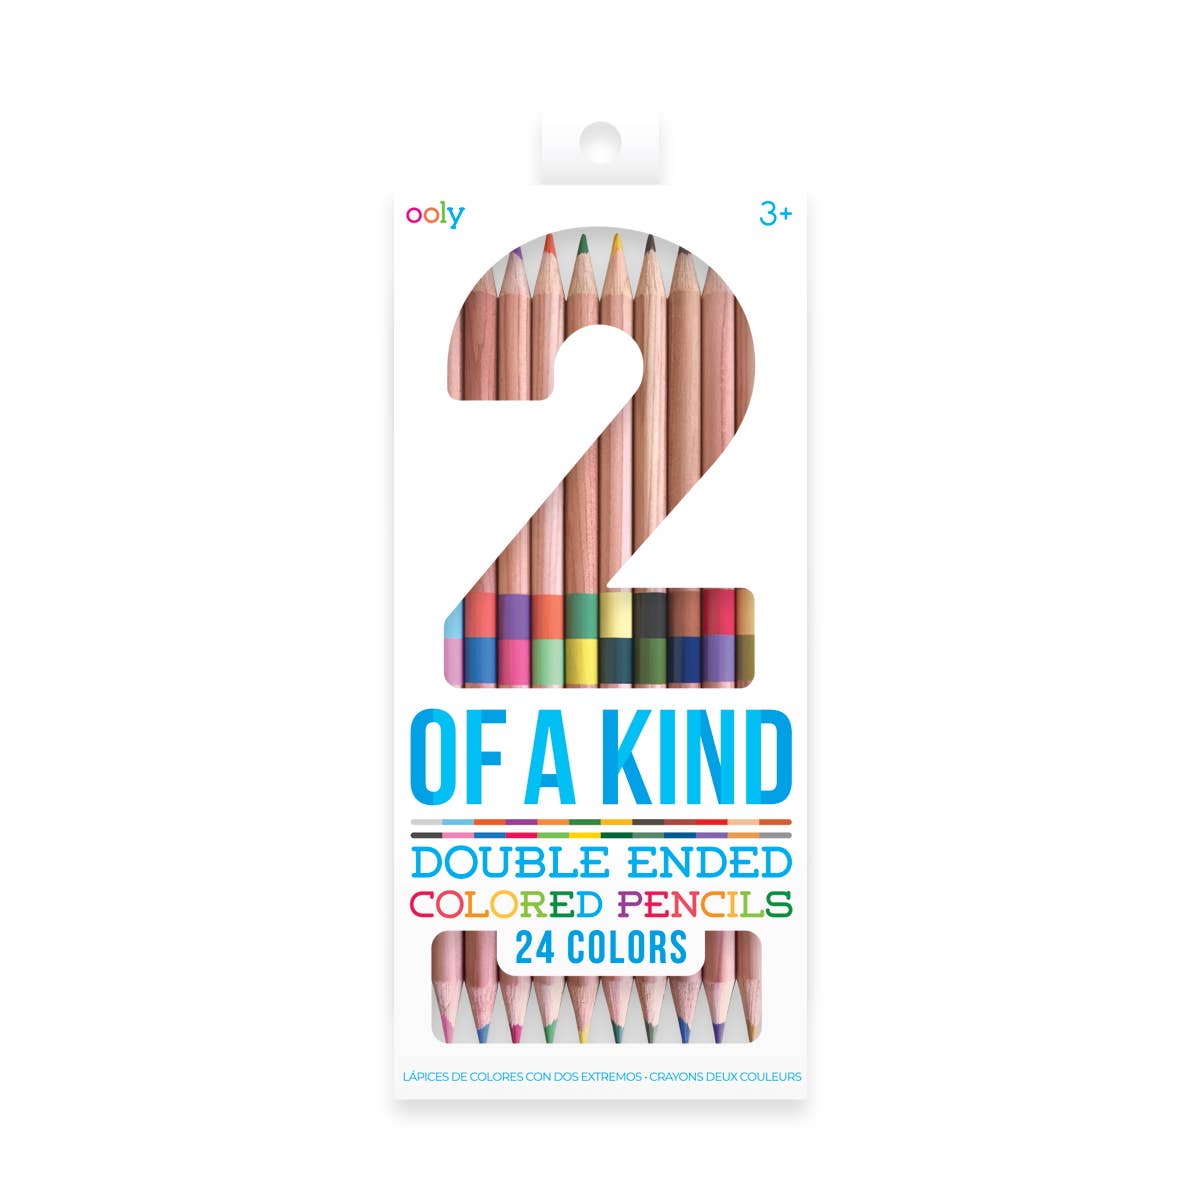 "2 of a Kind" Double-Ended Colored Pencils